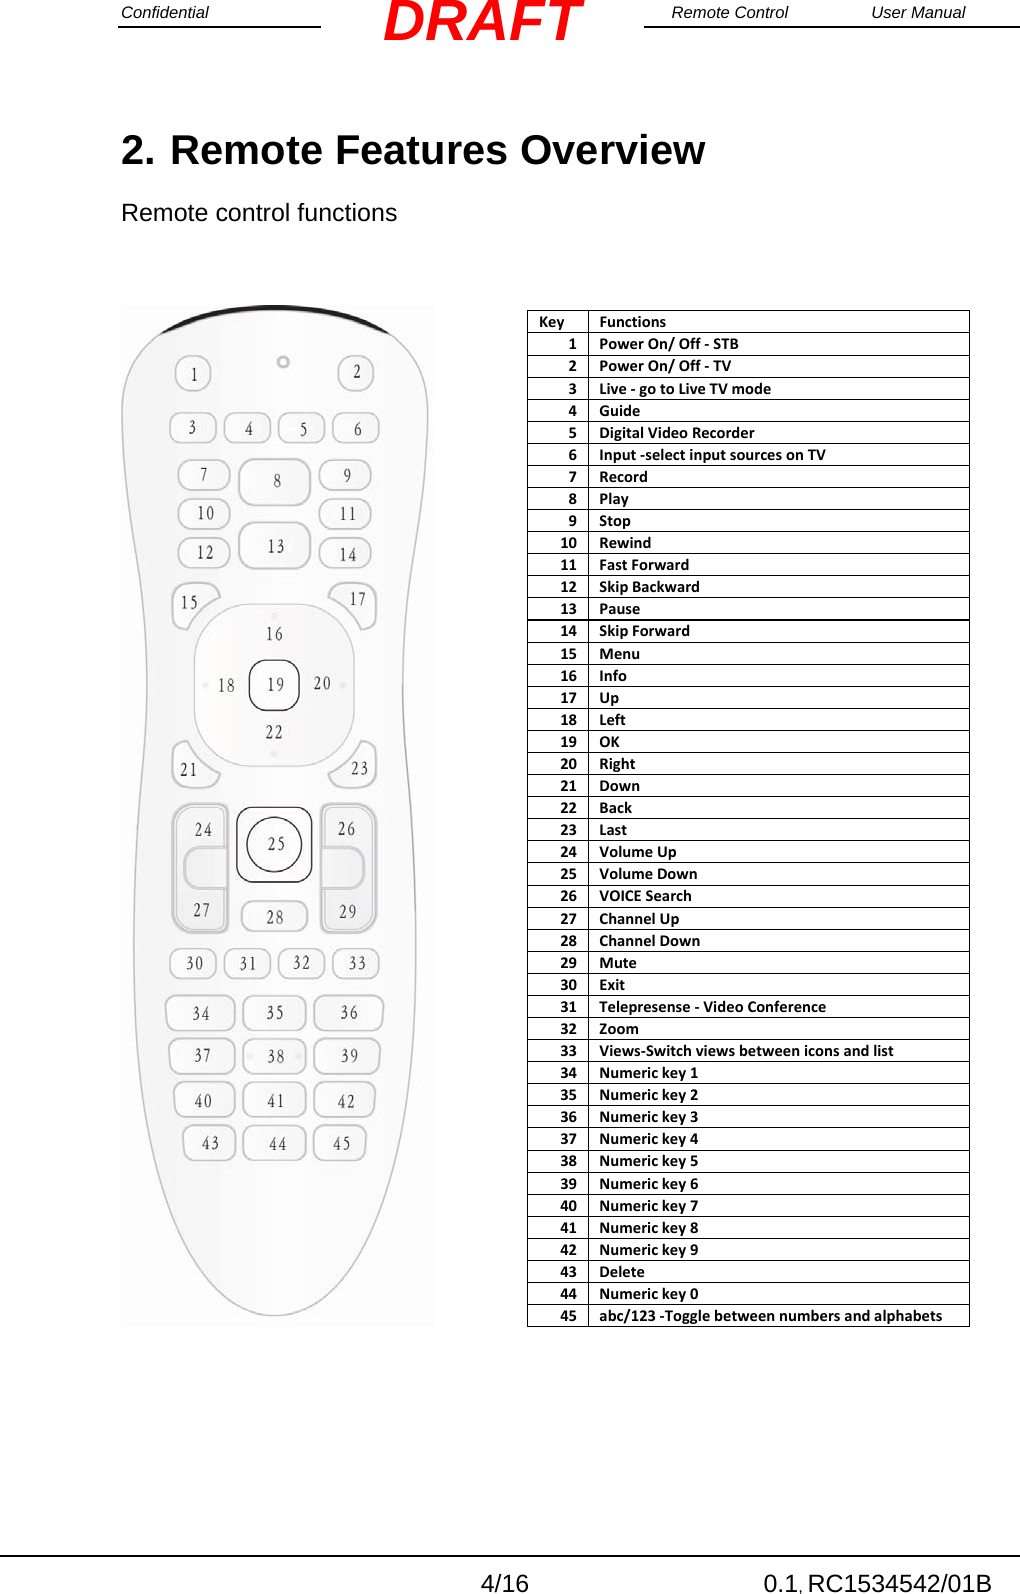 Confidential                                                                                                    Remote Control  User Manual  4/16 0.1, RC1534542/01B DRAFT2. Remote Features Overview Remote control functions         KeyFunctions1PowerOn/Off‐STB2PowerOn/Off‐TV3Live‐gotoLiveTVmode4Guide5DigitalVideoRecorder6Input‐selectinputsourcesonTV7Record8Play9Stop10 Rewind11 FastForward12 SkipBackward13 Pause14 SkipForward15 Menu16 Info17 Up18 Left19 OK20 Right21 Down22 Back23 Last24 VolumeUp25 VolumeDown26 VOICESearch27 ChannelUp28 ChannelDown29 Mute30 Exit31 Telepresense‐VideoConference32 Zoom33 Views‐Switchviewsbetweeniconsandlist34 Numerickey135 Numerickey236 Numerickey337 Numerickey438 Numerickey539 Numerickey640 Numerickey741 Numerickey842 Numerickey943 Delete44 Numerickey045 abc/123‐Togglebetweennumbersandalphabets